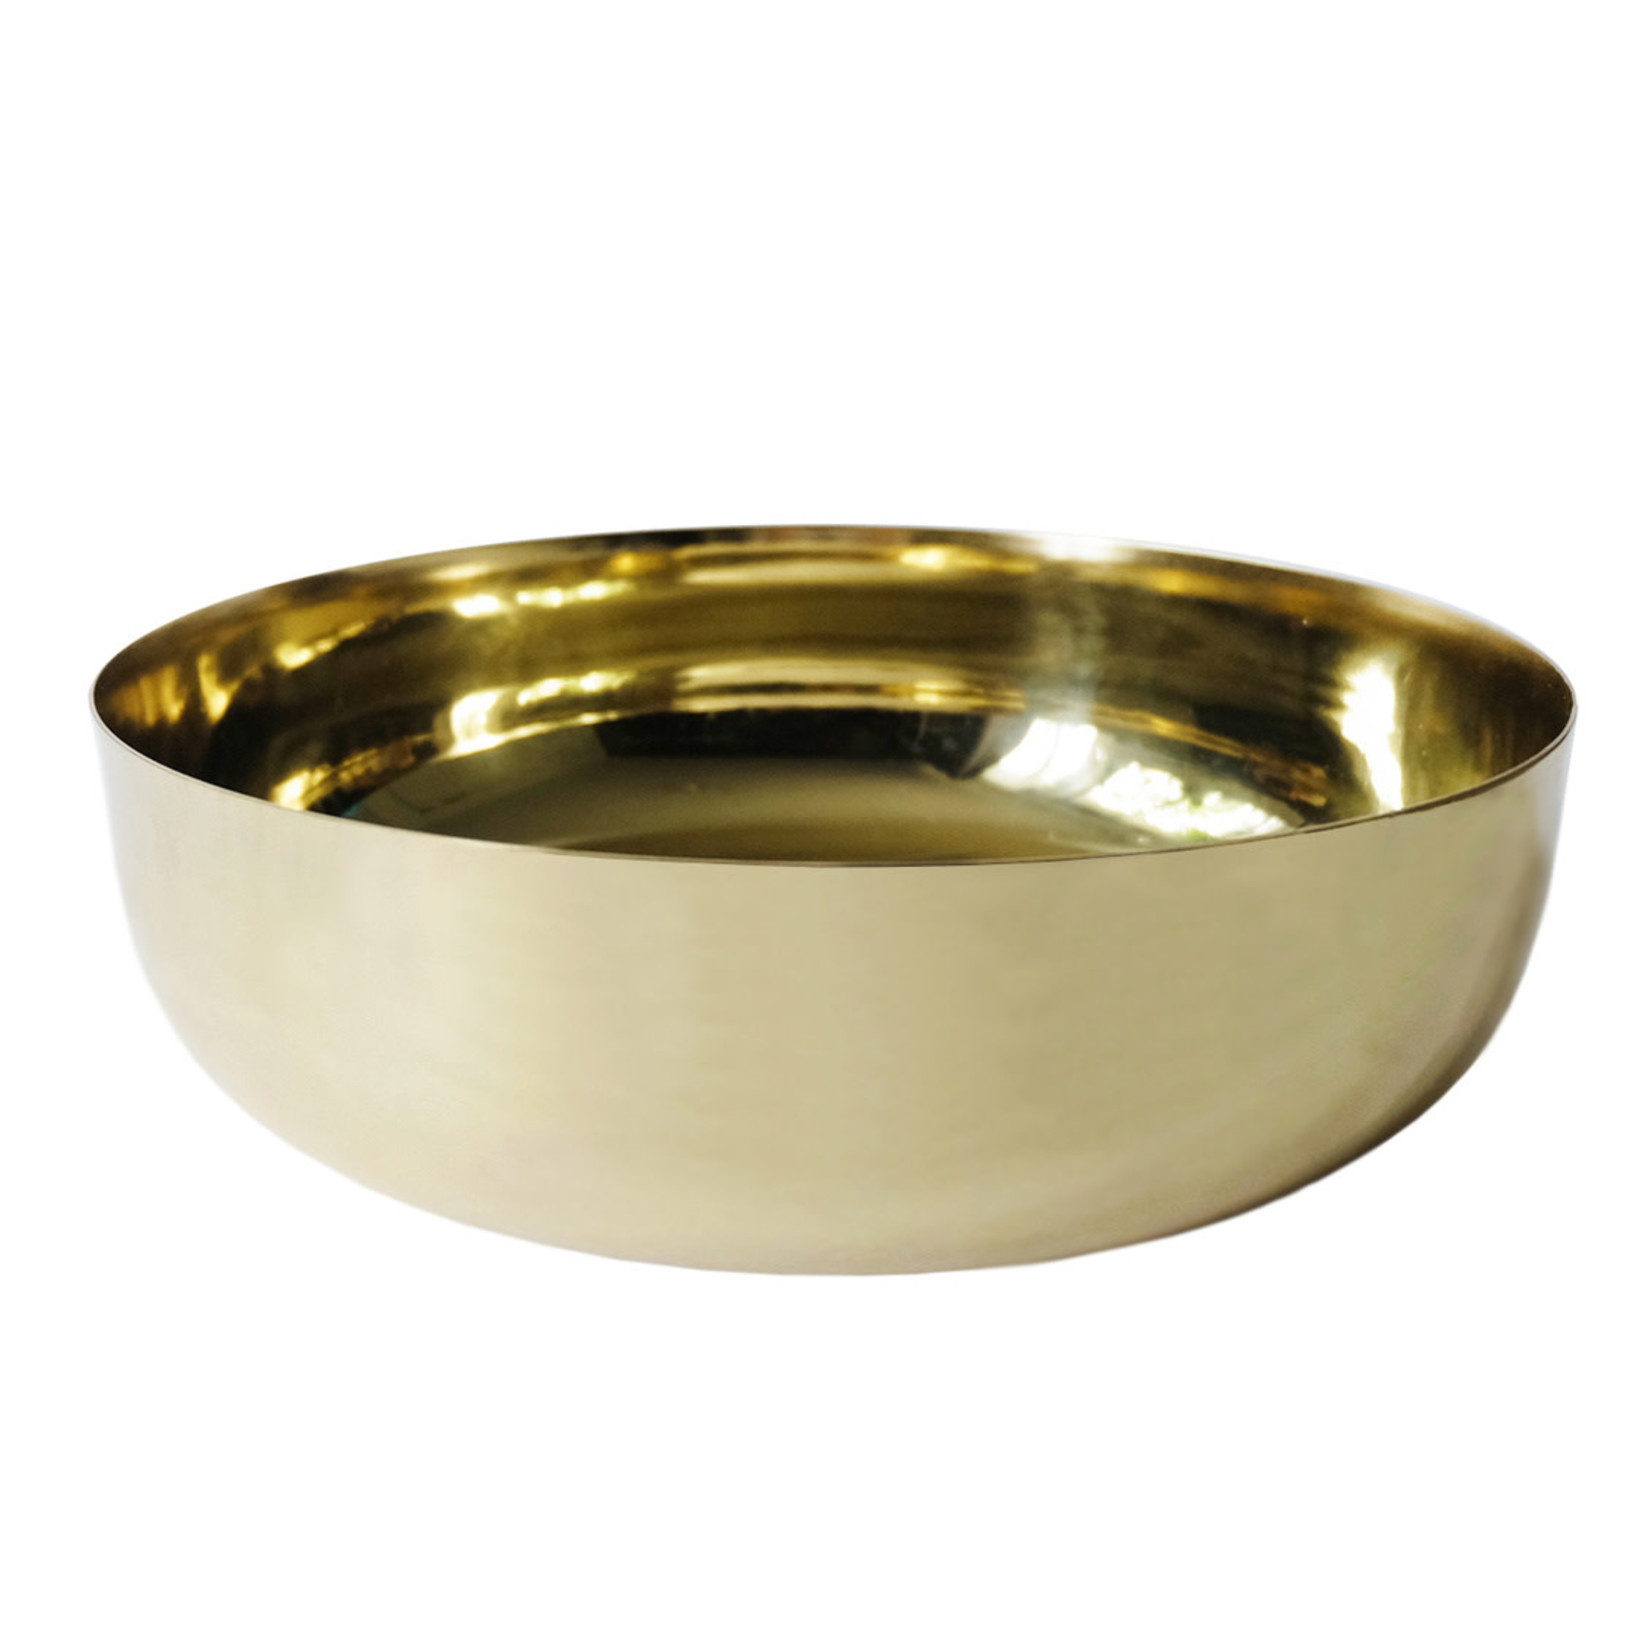 33660 Gold 10 Bowl W Flaired Edge